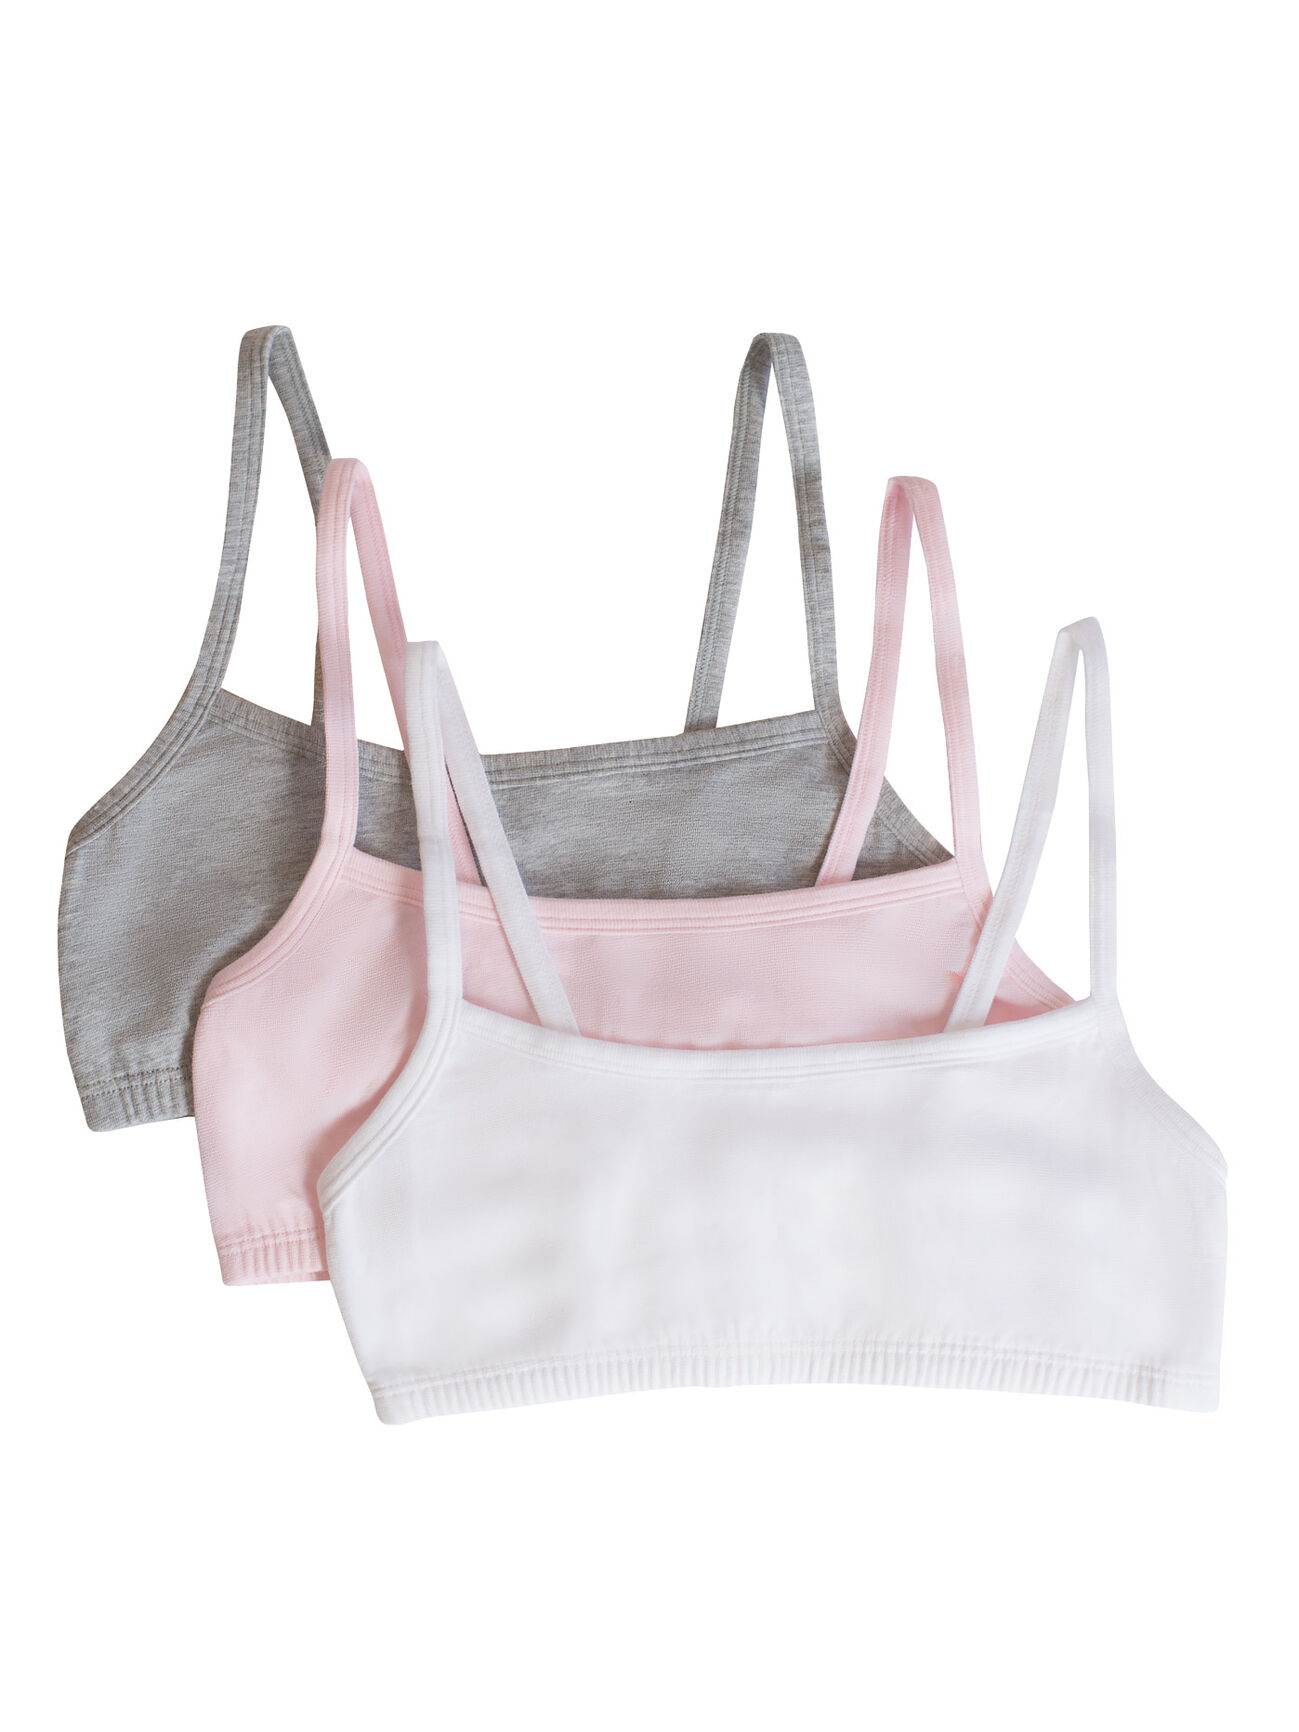 Kids Girls Training Bras Quality Lycra Cotton Pink Letters